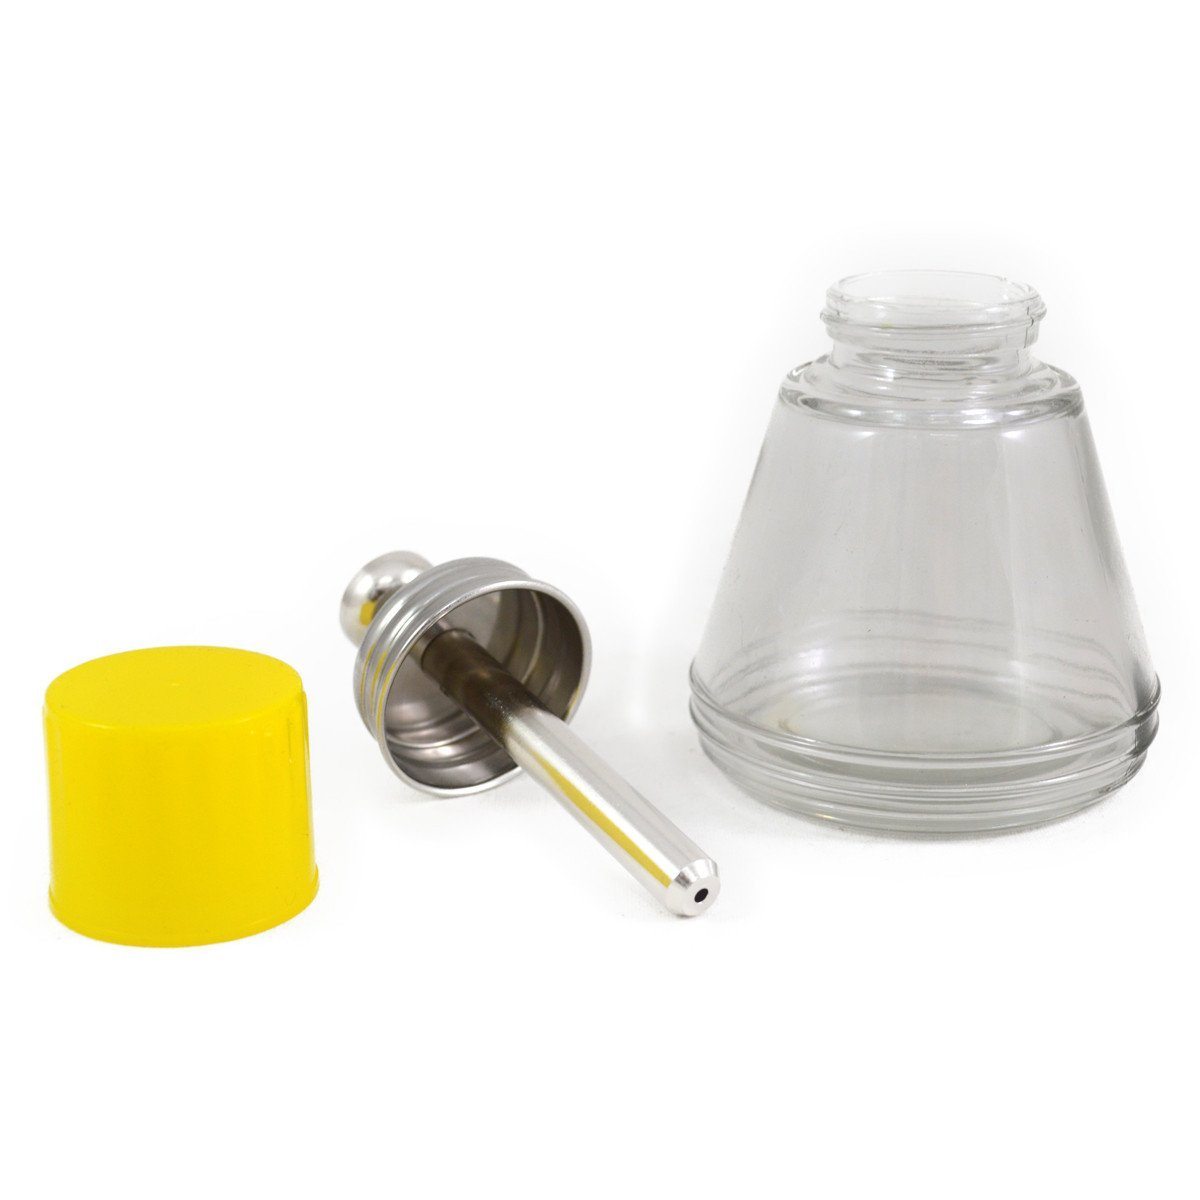 GLASS WATER AND SOLVENT DISPENSER - KING'S